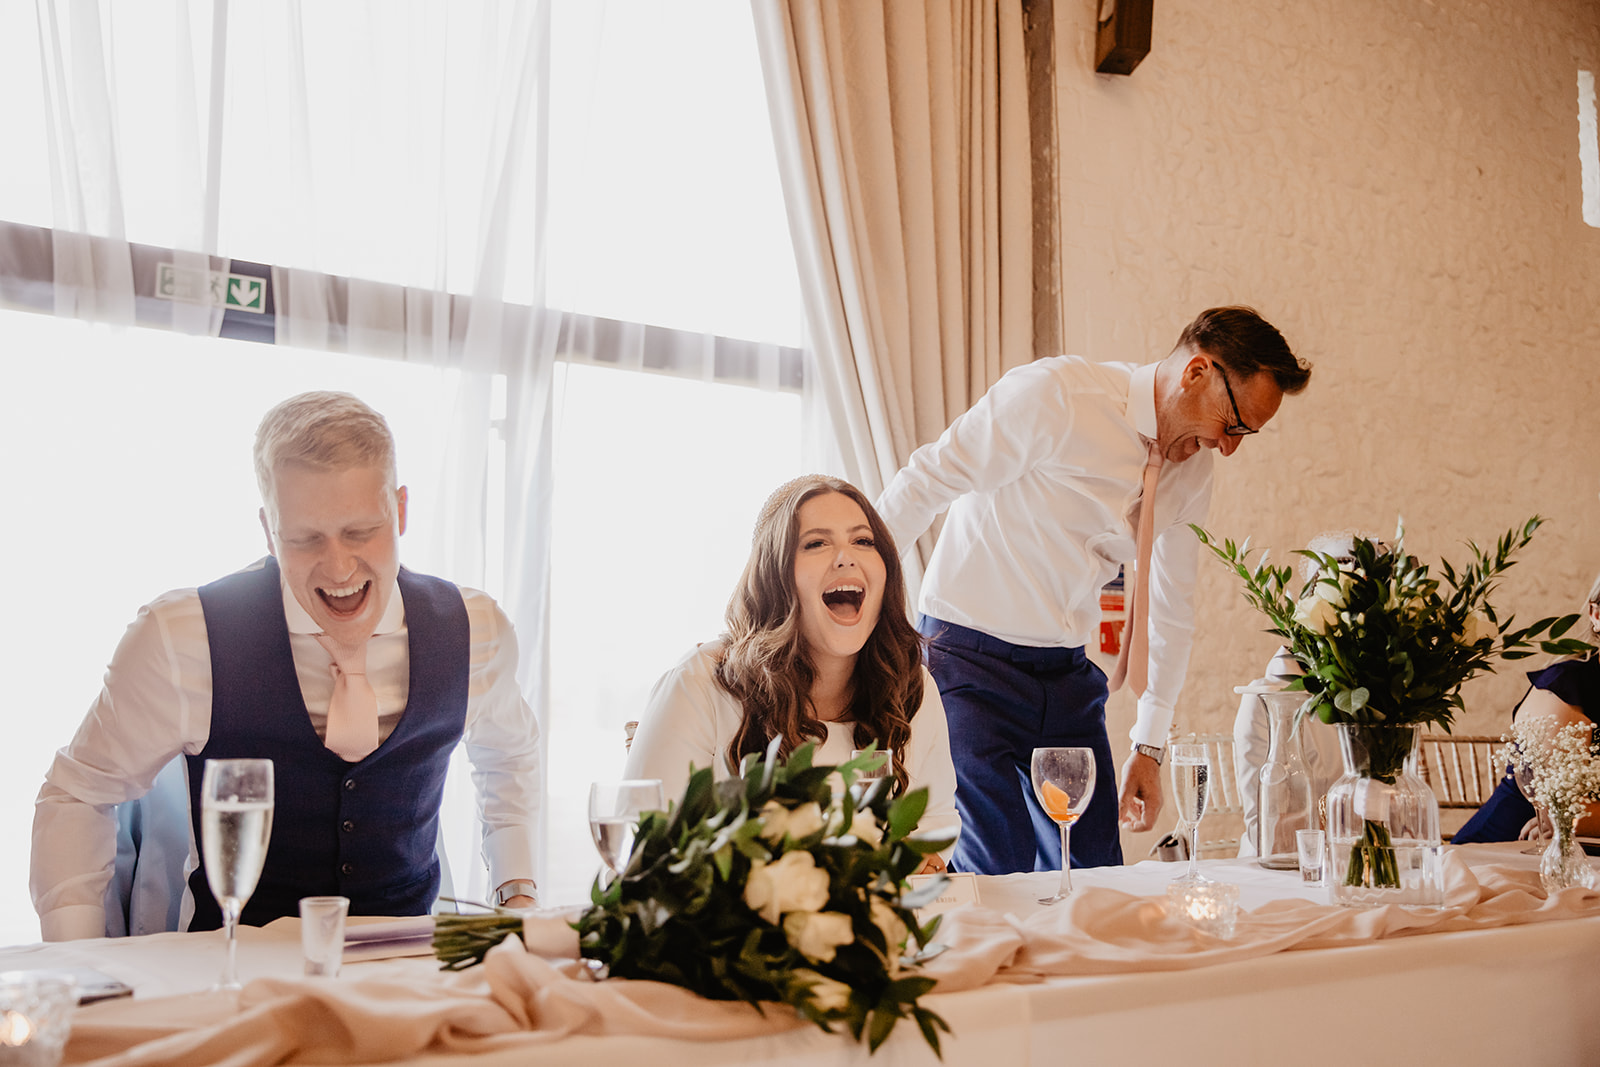 Wedding Reception speeches at a Field Place Manor House Wedding in Worthing, Sussex. By Olive Joy Photography